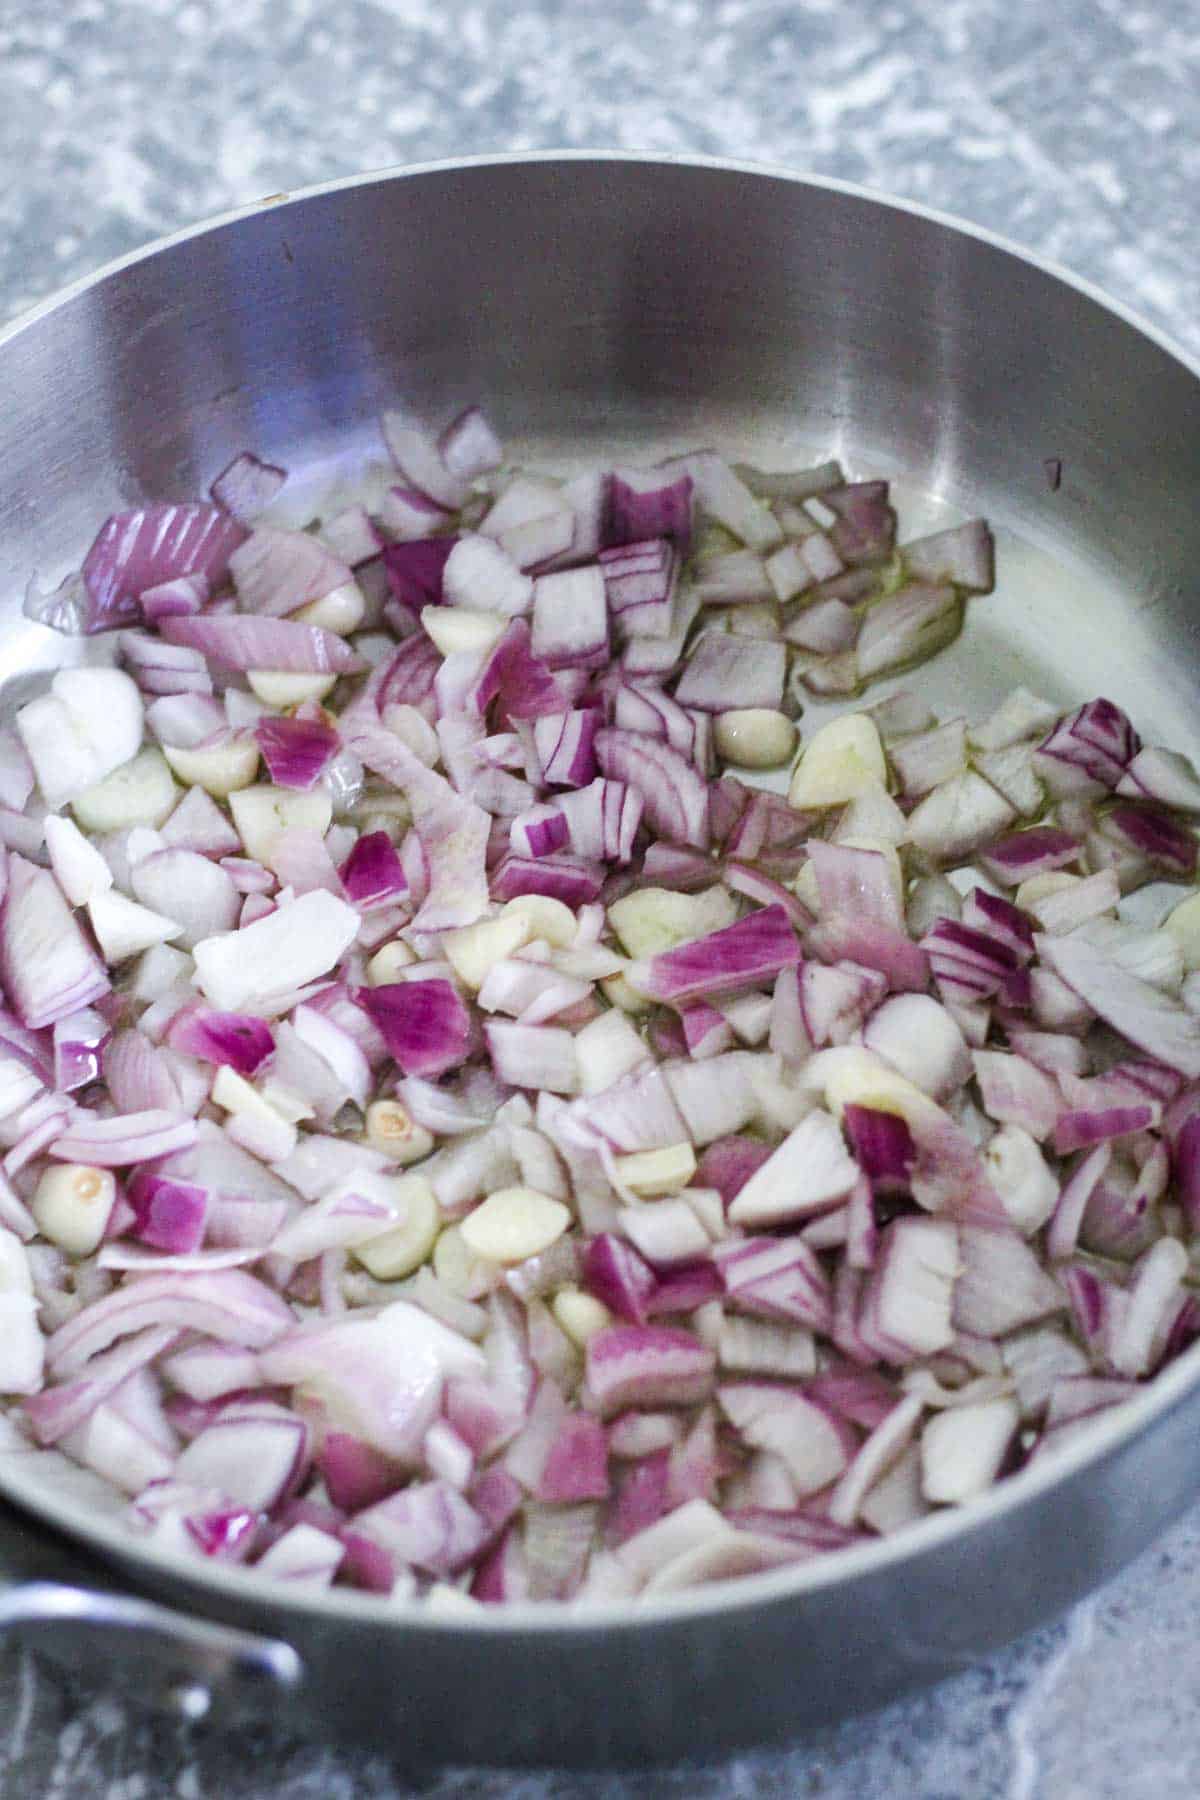 Sauteing onion and garlic in olive oil. 